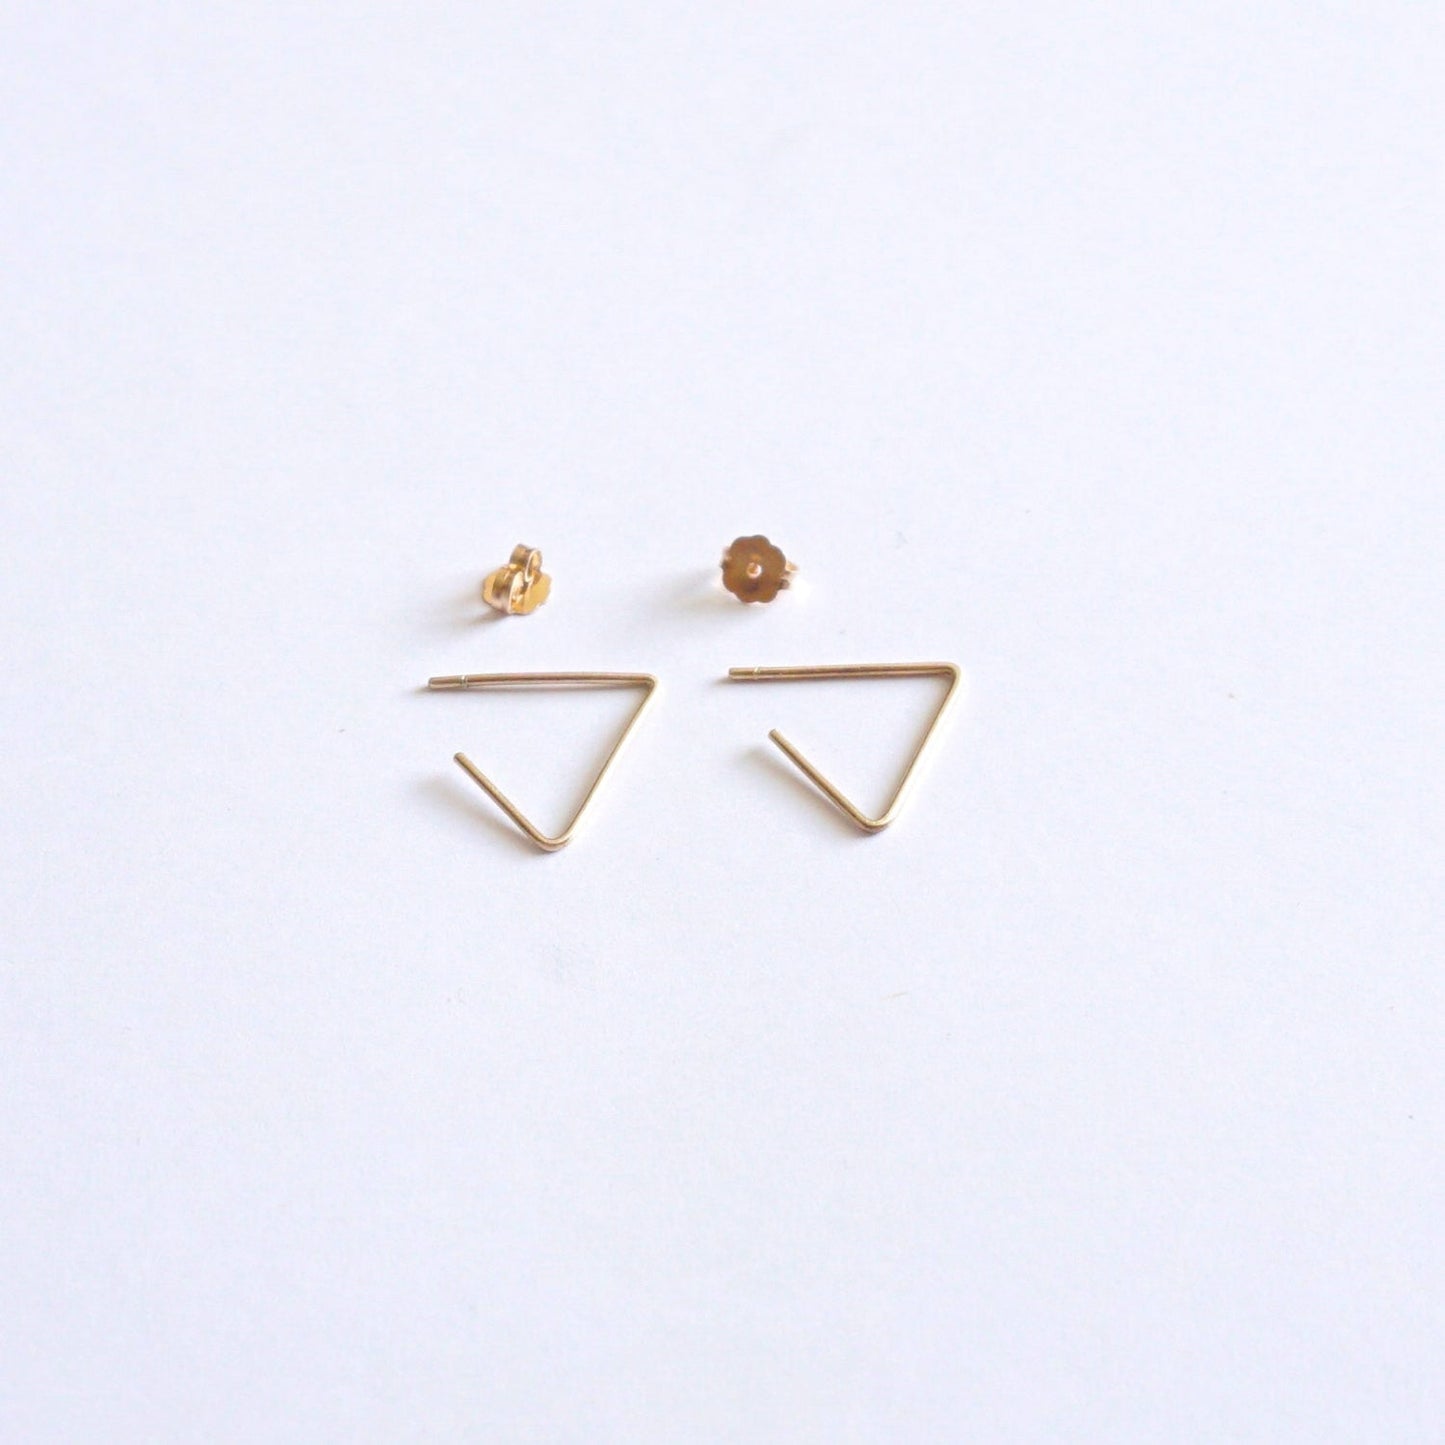 15mm Open Triangle Earrings 034 - Patination Design